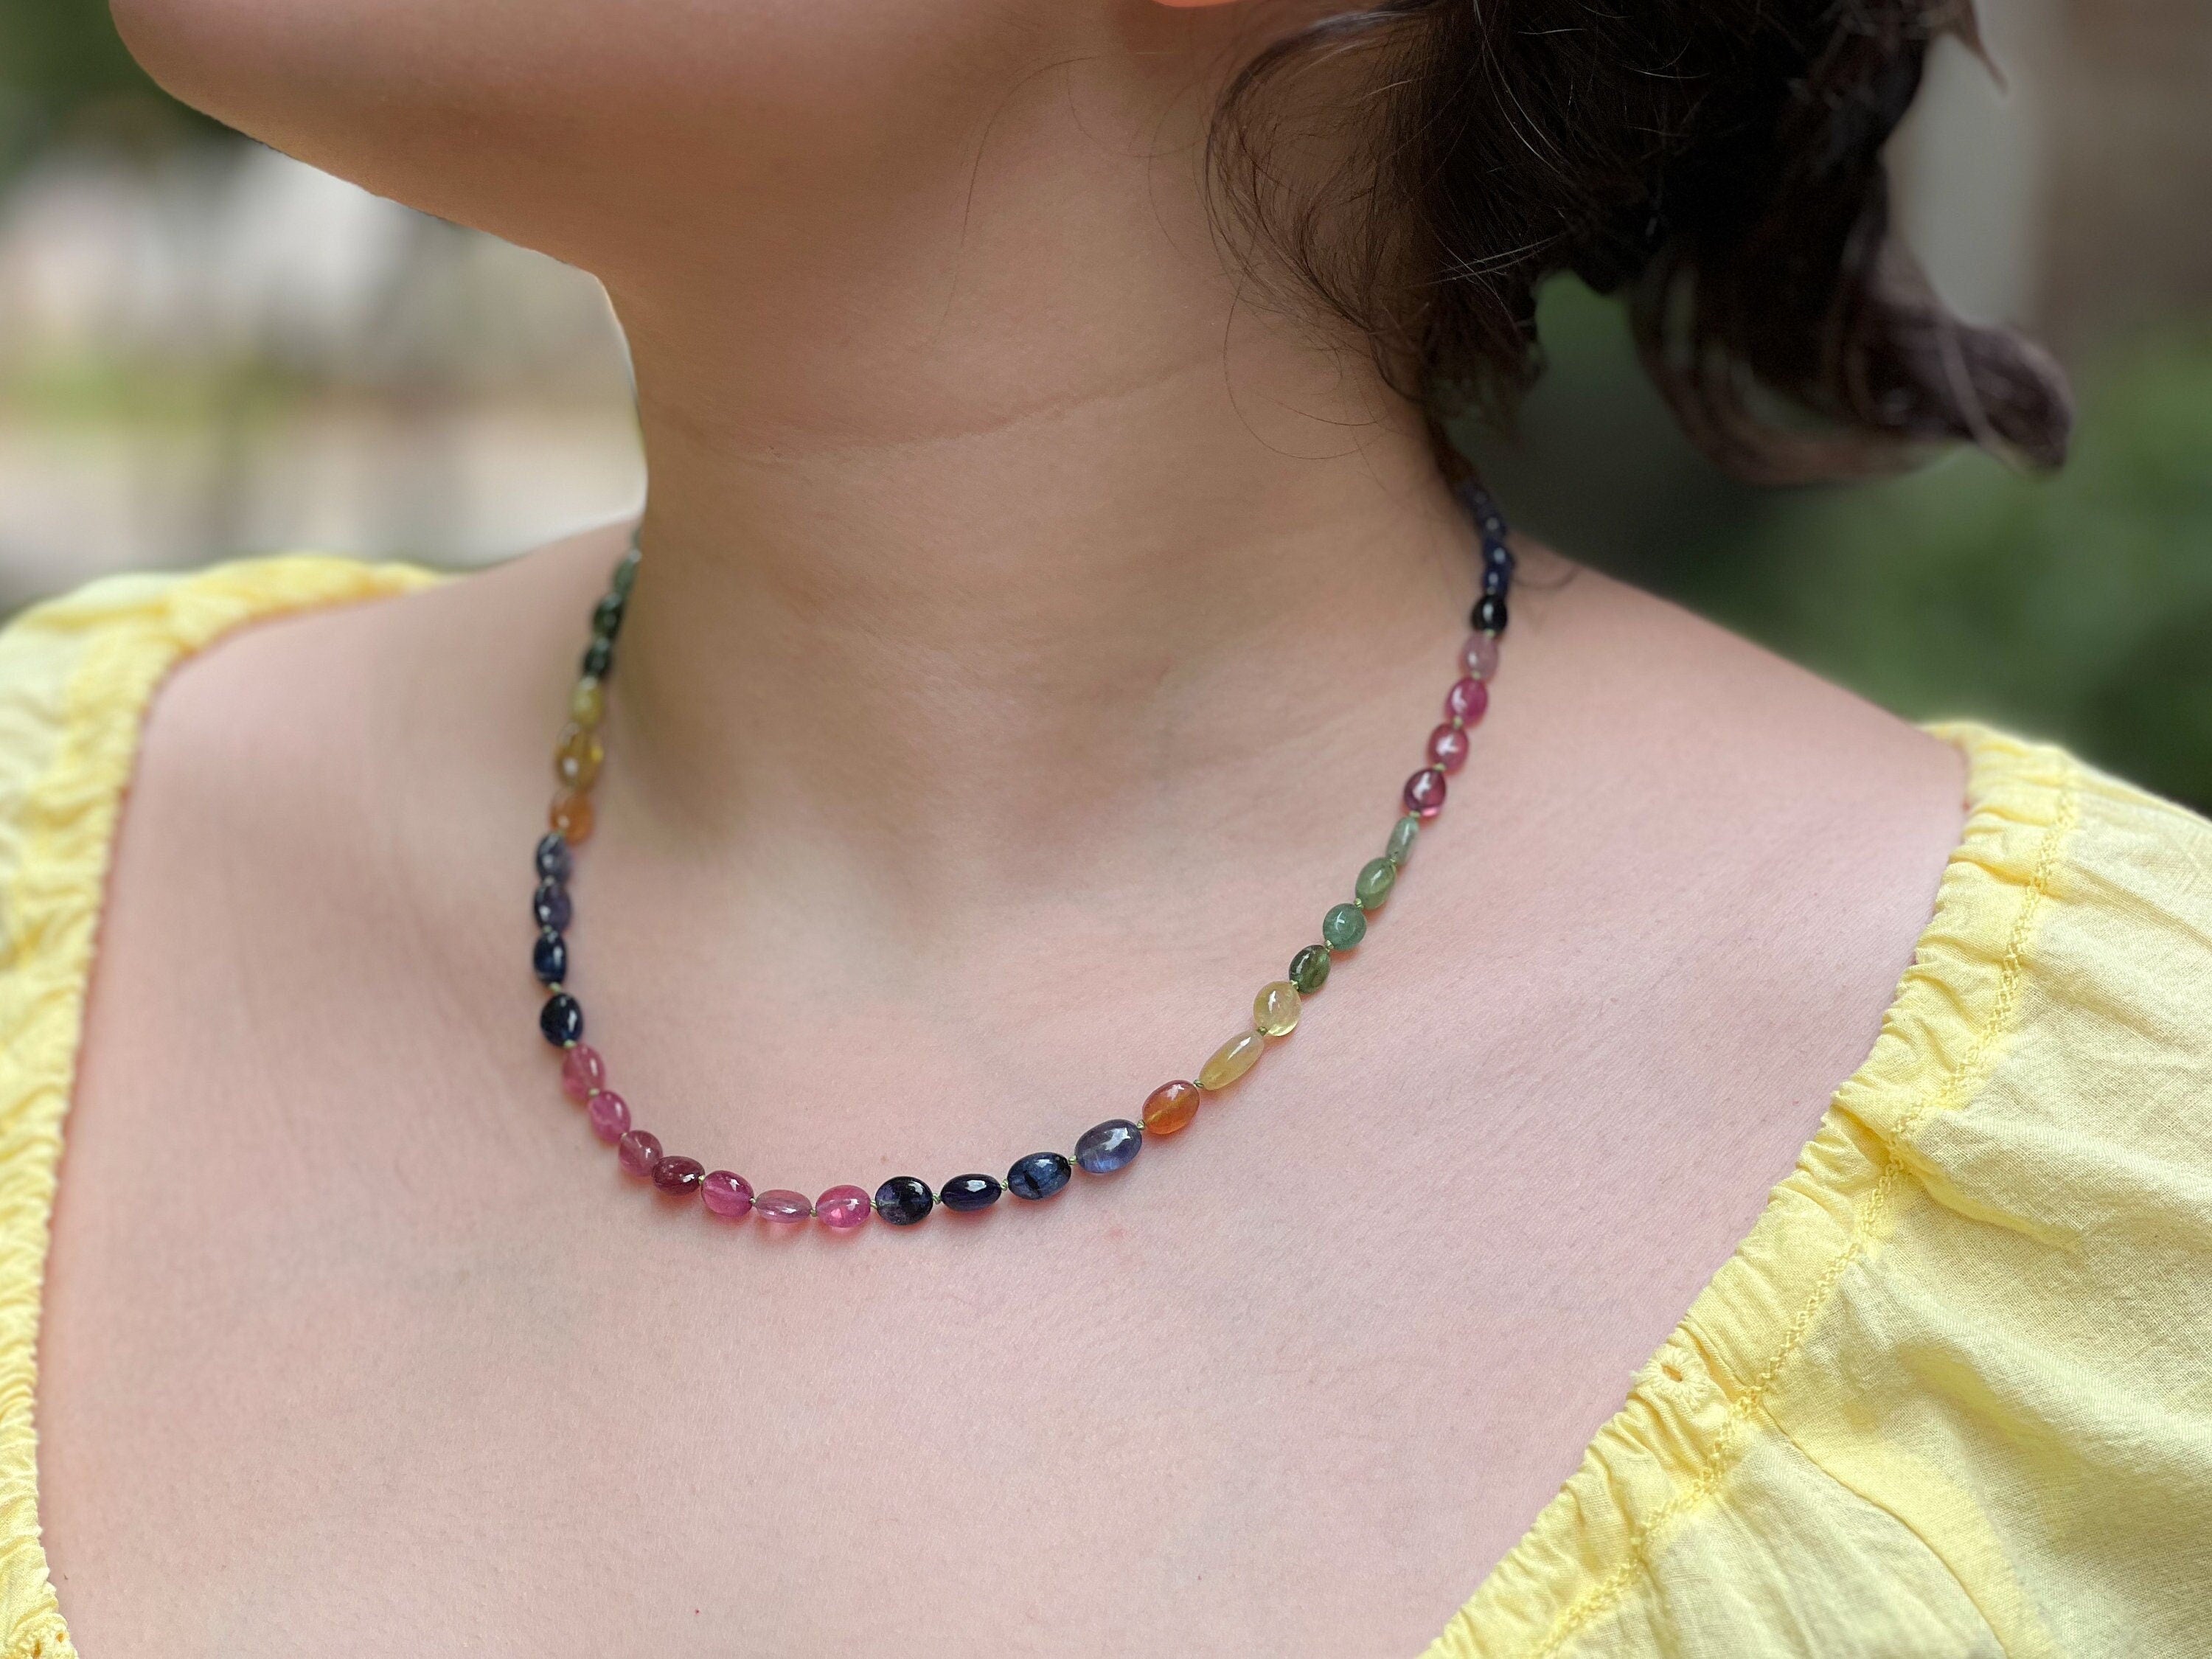 Sapphire_Necklace,Multi_color_sapphire,Gemstone_Necklace,hand_knotted,AAA_Sapphires,Sapphires,Boho_Necklace,Layering_necklace,Natural_Gemstones,Gift_for_Her,November_Birthstone,handmade_necklace,Colorful_necklace